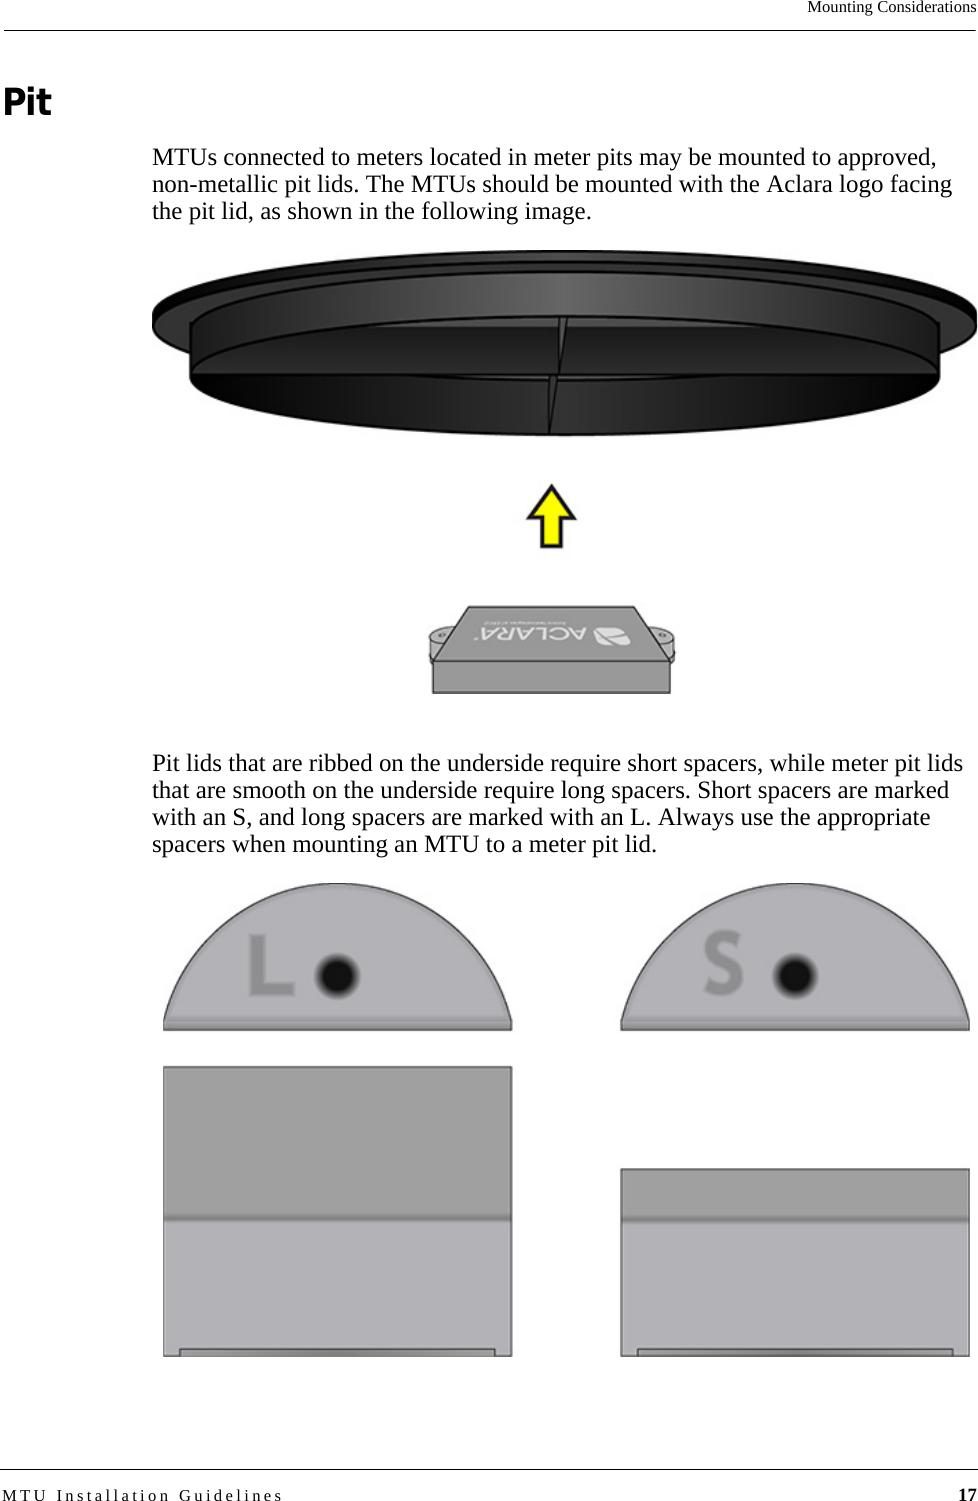 Mounting ConsiderationsMTU Installation Guidelines 17PitMTUs connected to meters located in meter pits may be mounted to approved, non-metallic pit lids. The MTUs should be mounted with the Aclara logo facing the pit lid, as shown in the following image. Pit lids that are ribbed on the underside require short spacers, while meter pit lids that are smooth on the underside require long spacers. Short spacers are marked with an S, and long spacers are marked with an L. Always use the appropriate spacers when mounting an MTU to a meter pit lid.